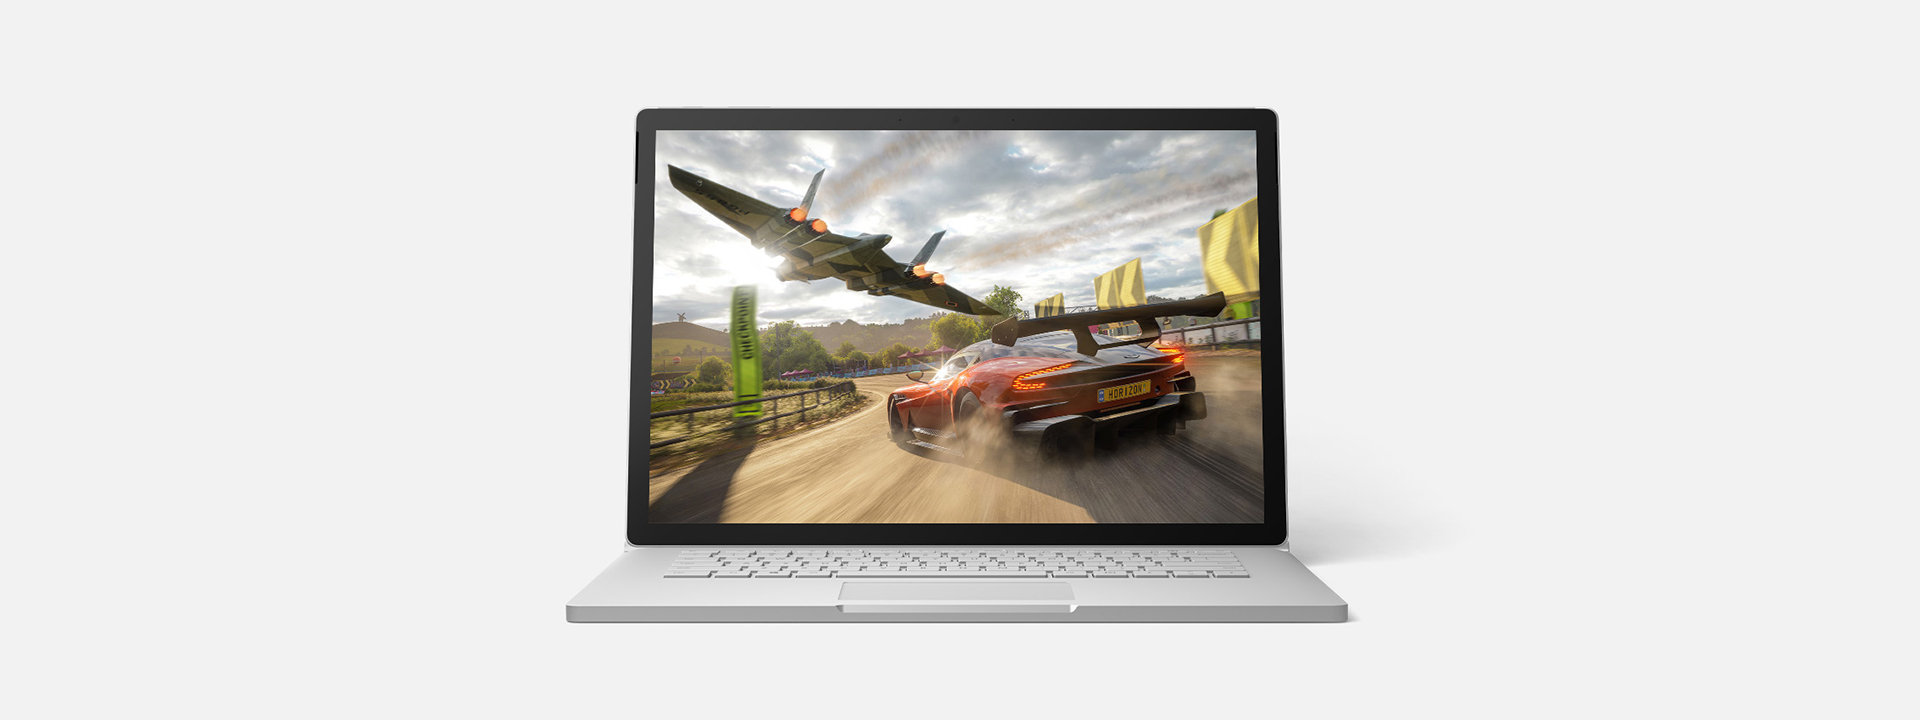 Surface Book 3 running an Xbox game.